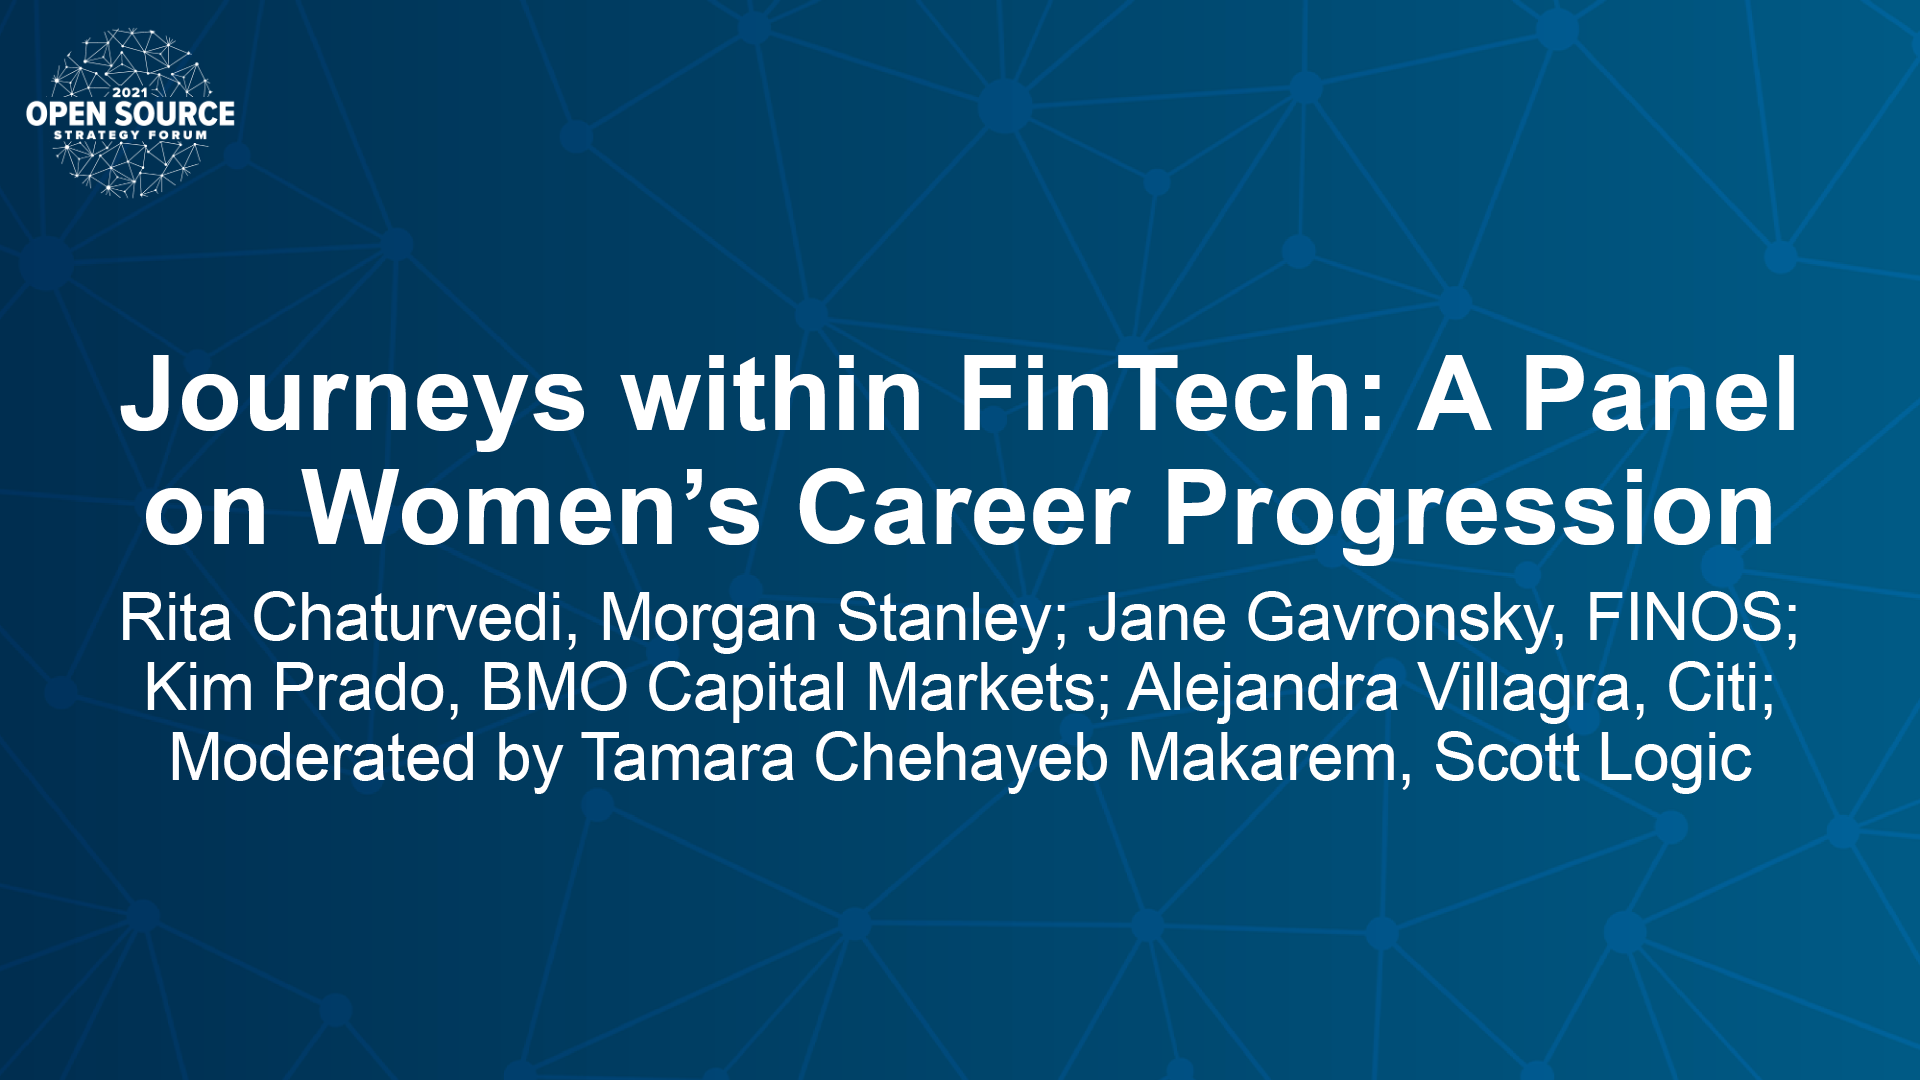 OSSF NYC 2021: Journeys within FinTech – A Panel on Women’s Career Progression